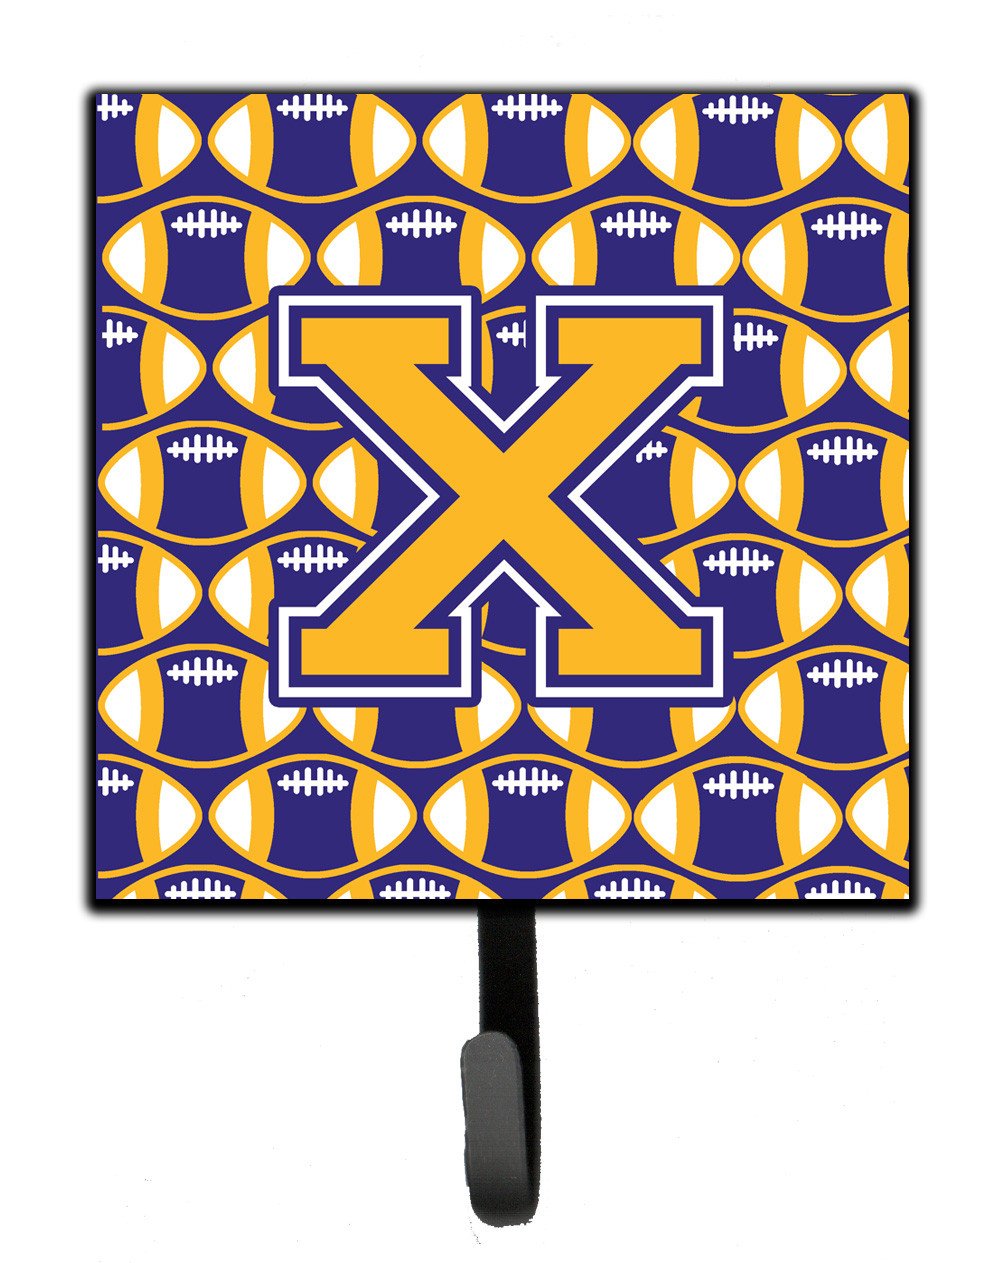 Letter X Football Purple and Gold Leash or Key Holder CJ1064-XSH4 by Caroline's Treasures